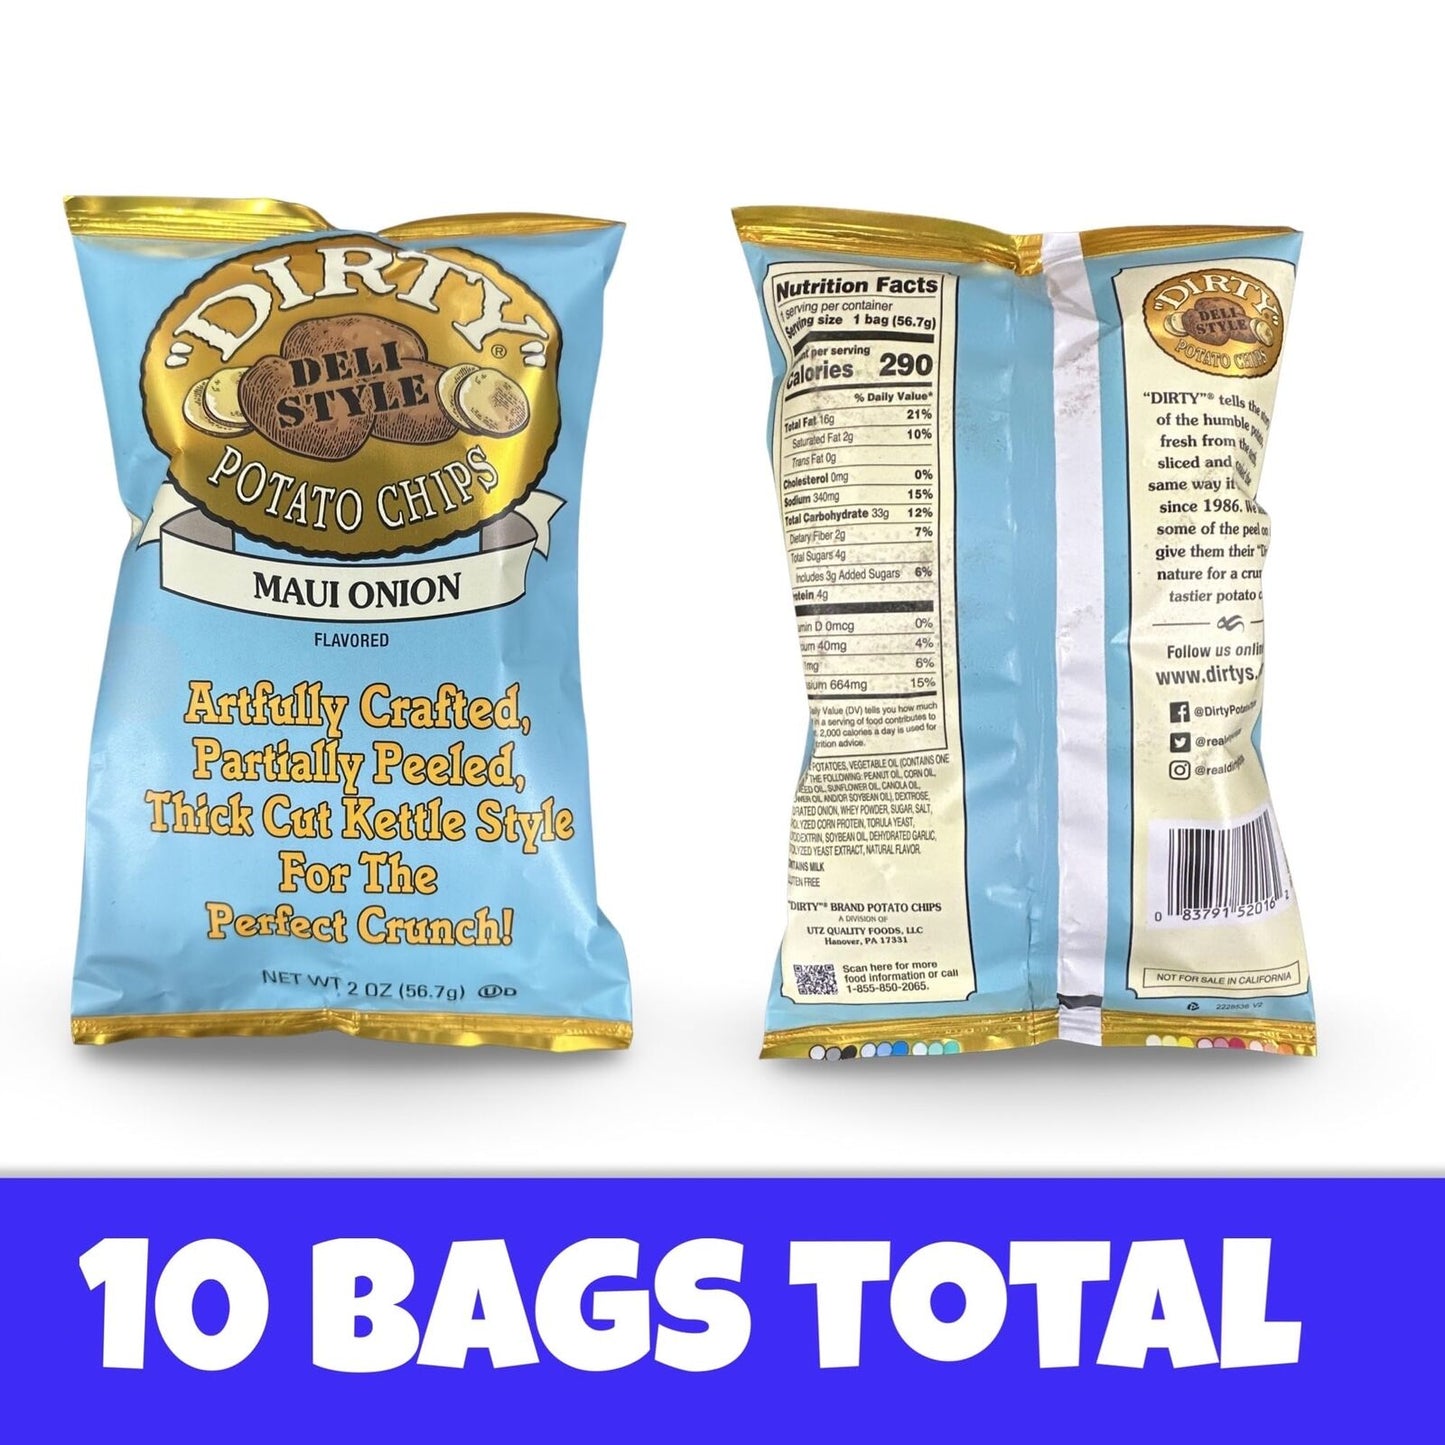 Deli Style Potato Chips Value Pack | Bundled by Tribeca Curations, Maui Onion |